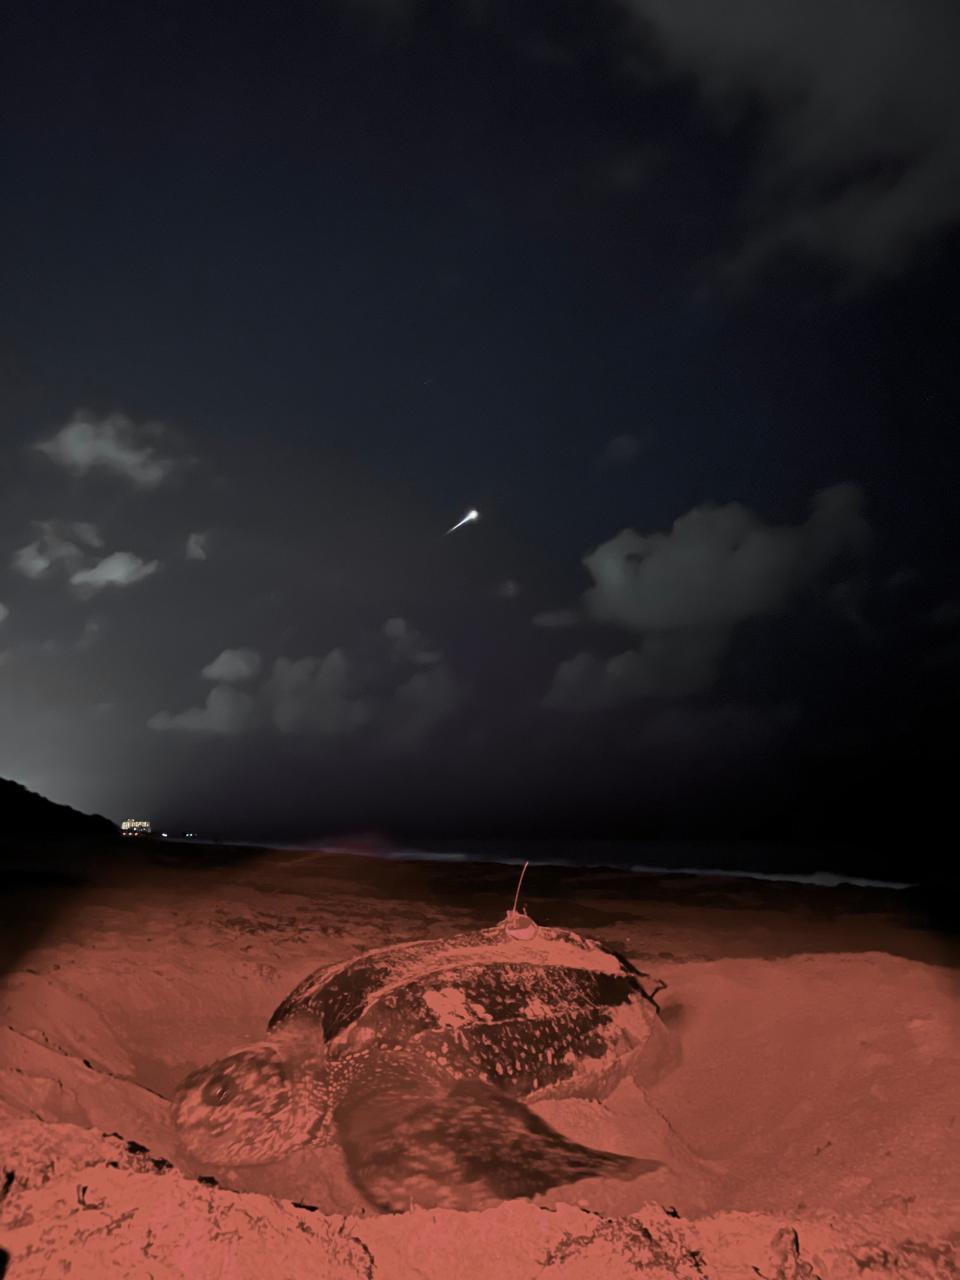 A leatherback sea turtle nests on a beach in southern Florida as a Space-X rocket soars skyward in the background. Leatherbacks are the largest turtles in the world. Among their greatest threats are plastic bags floating in the ocean; they mistake them for jellyfish, their primary food. [Photo provided by Tyler Krotenburg]